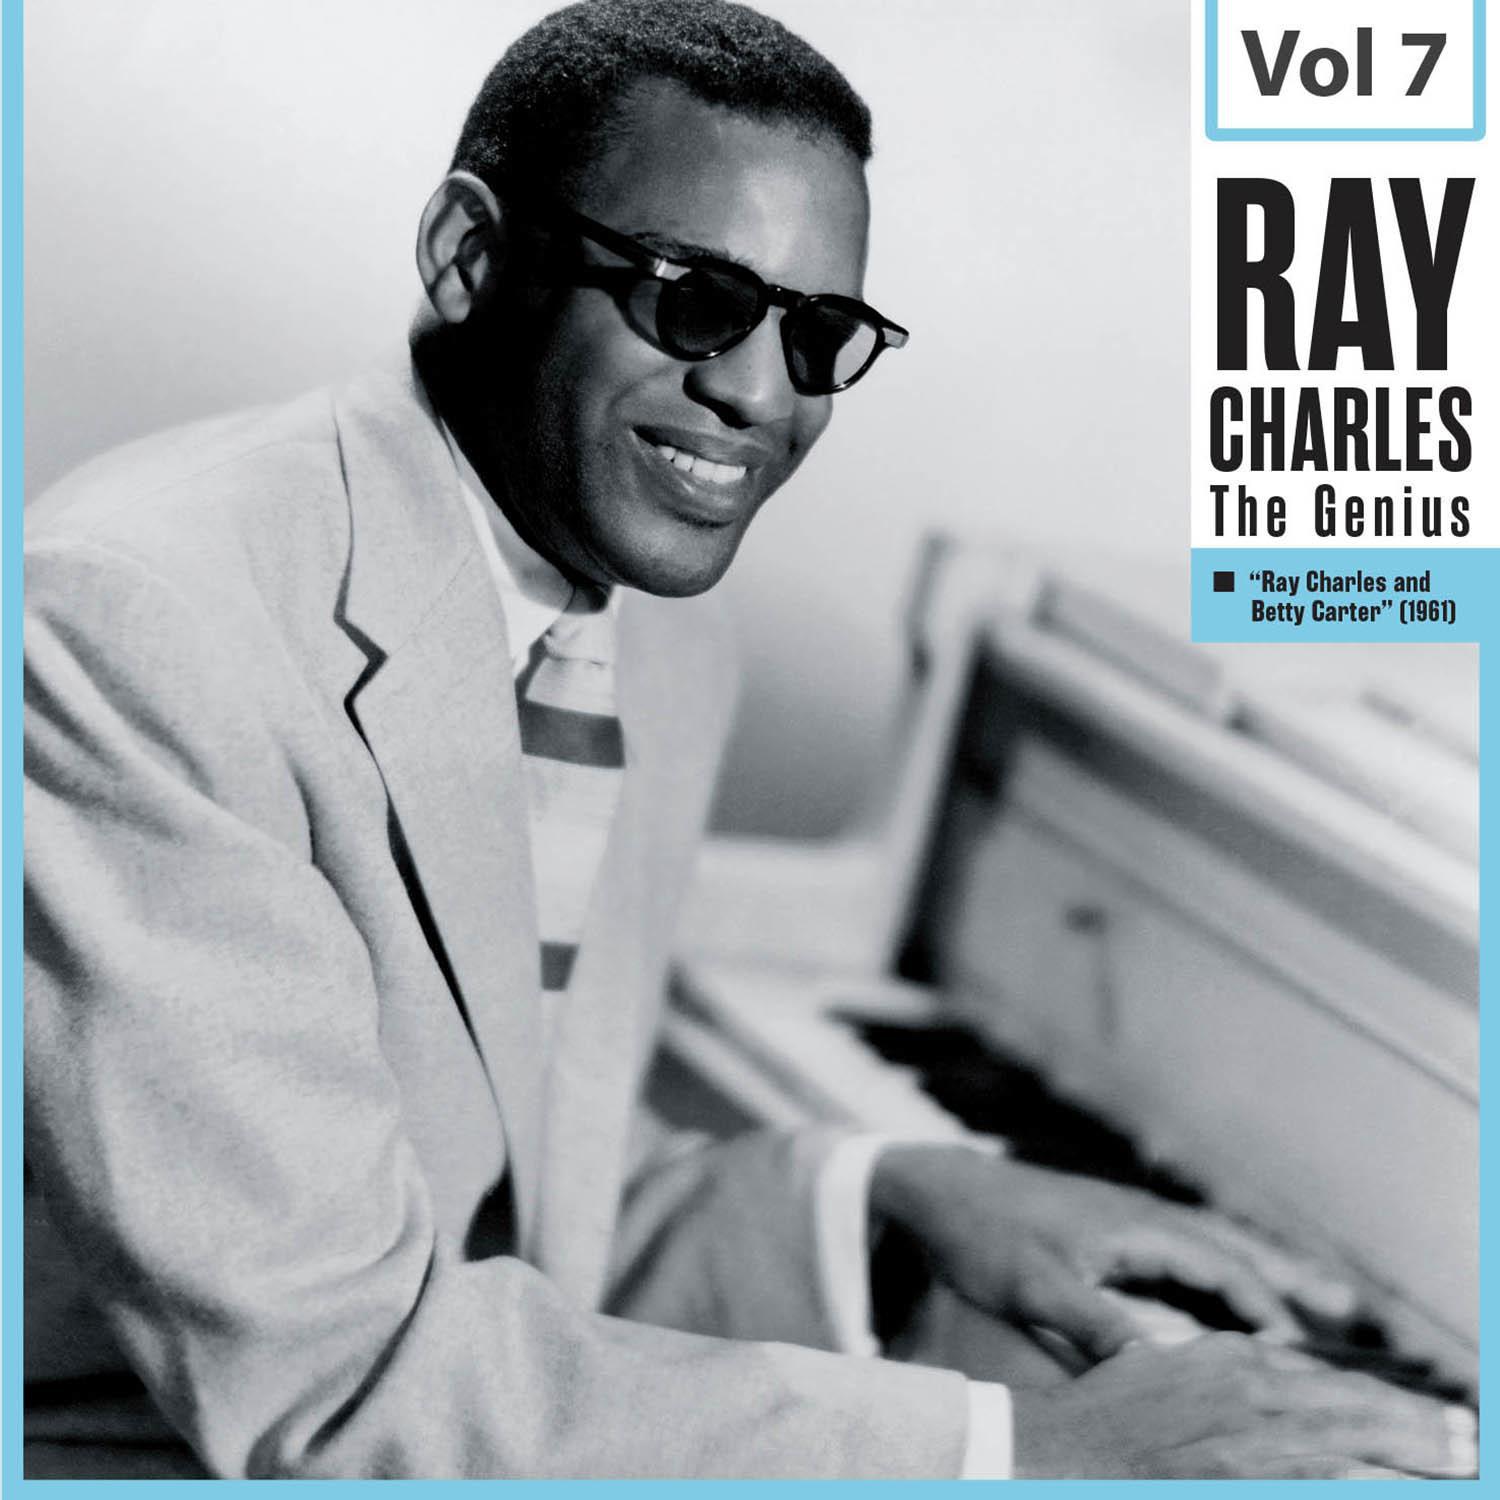 The Genius - Ray Chales, Vol. 7